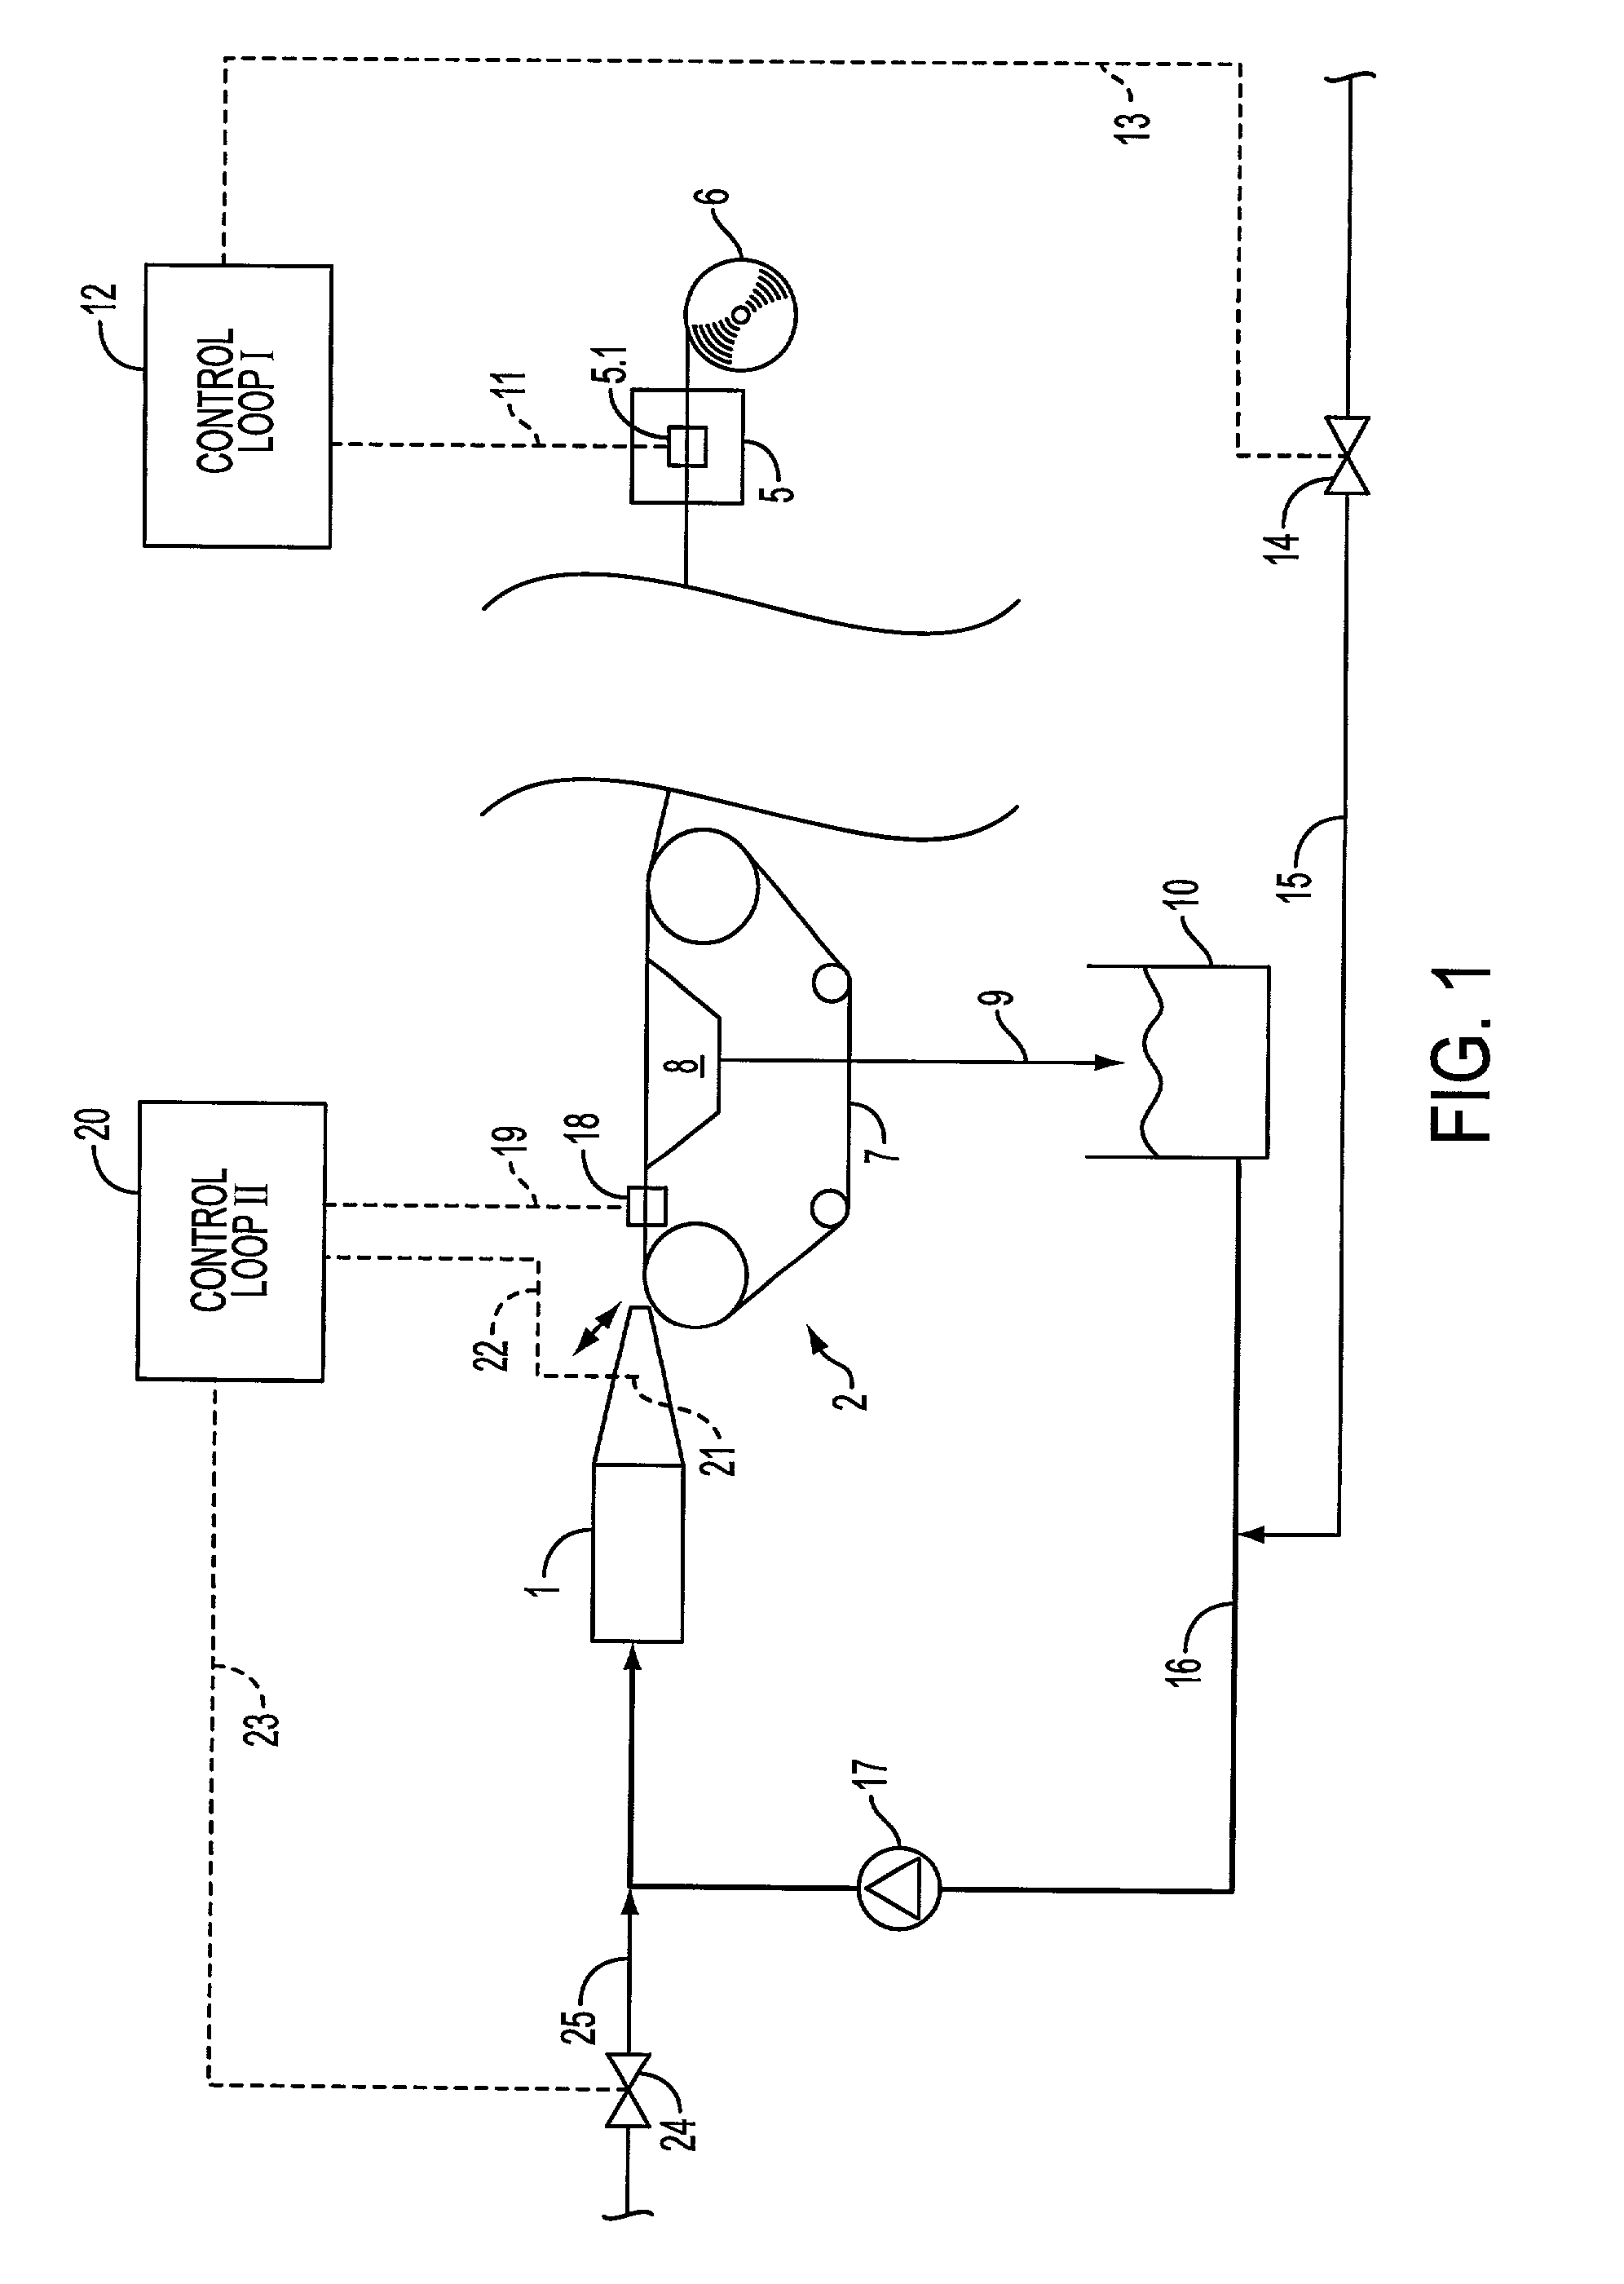 Method to control or regulate the basis weight of a paper or cardboard web